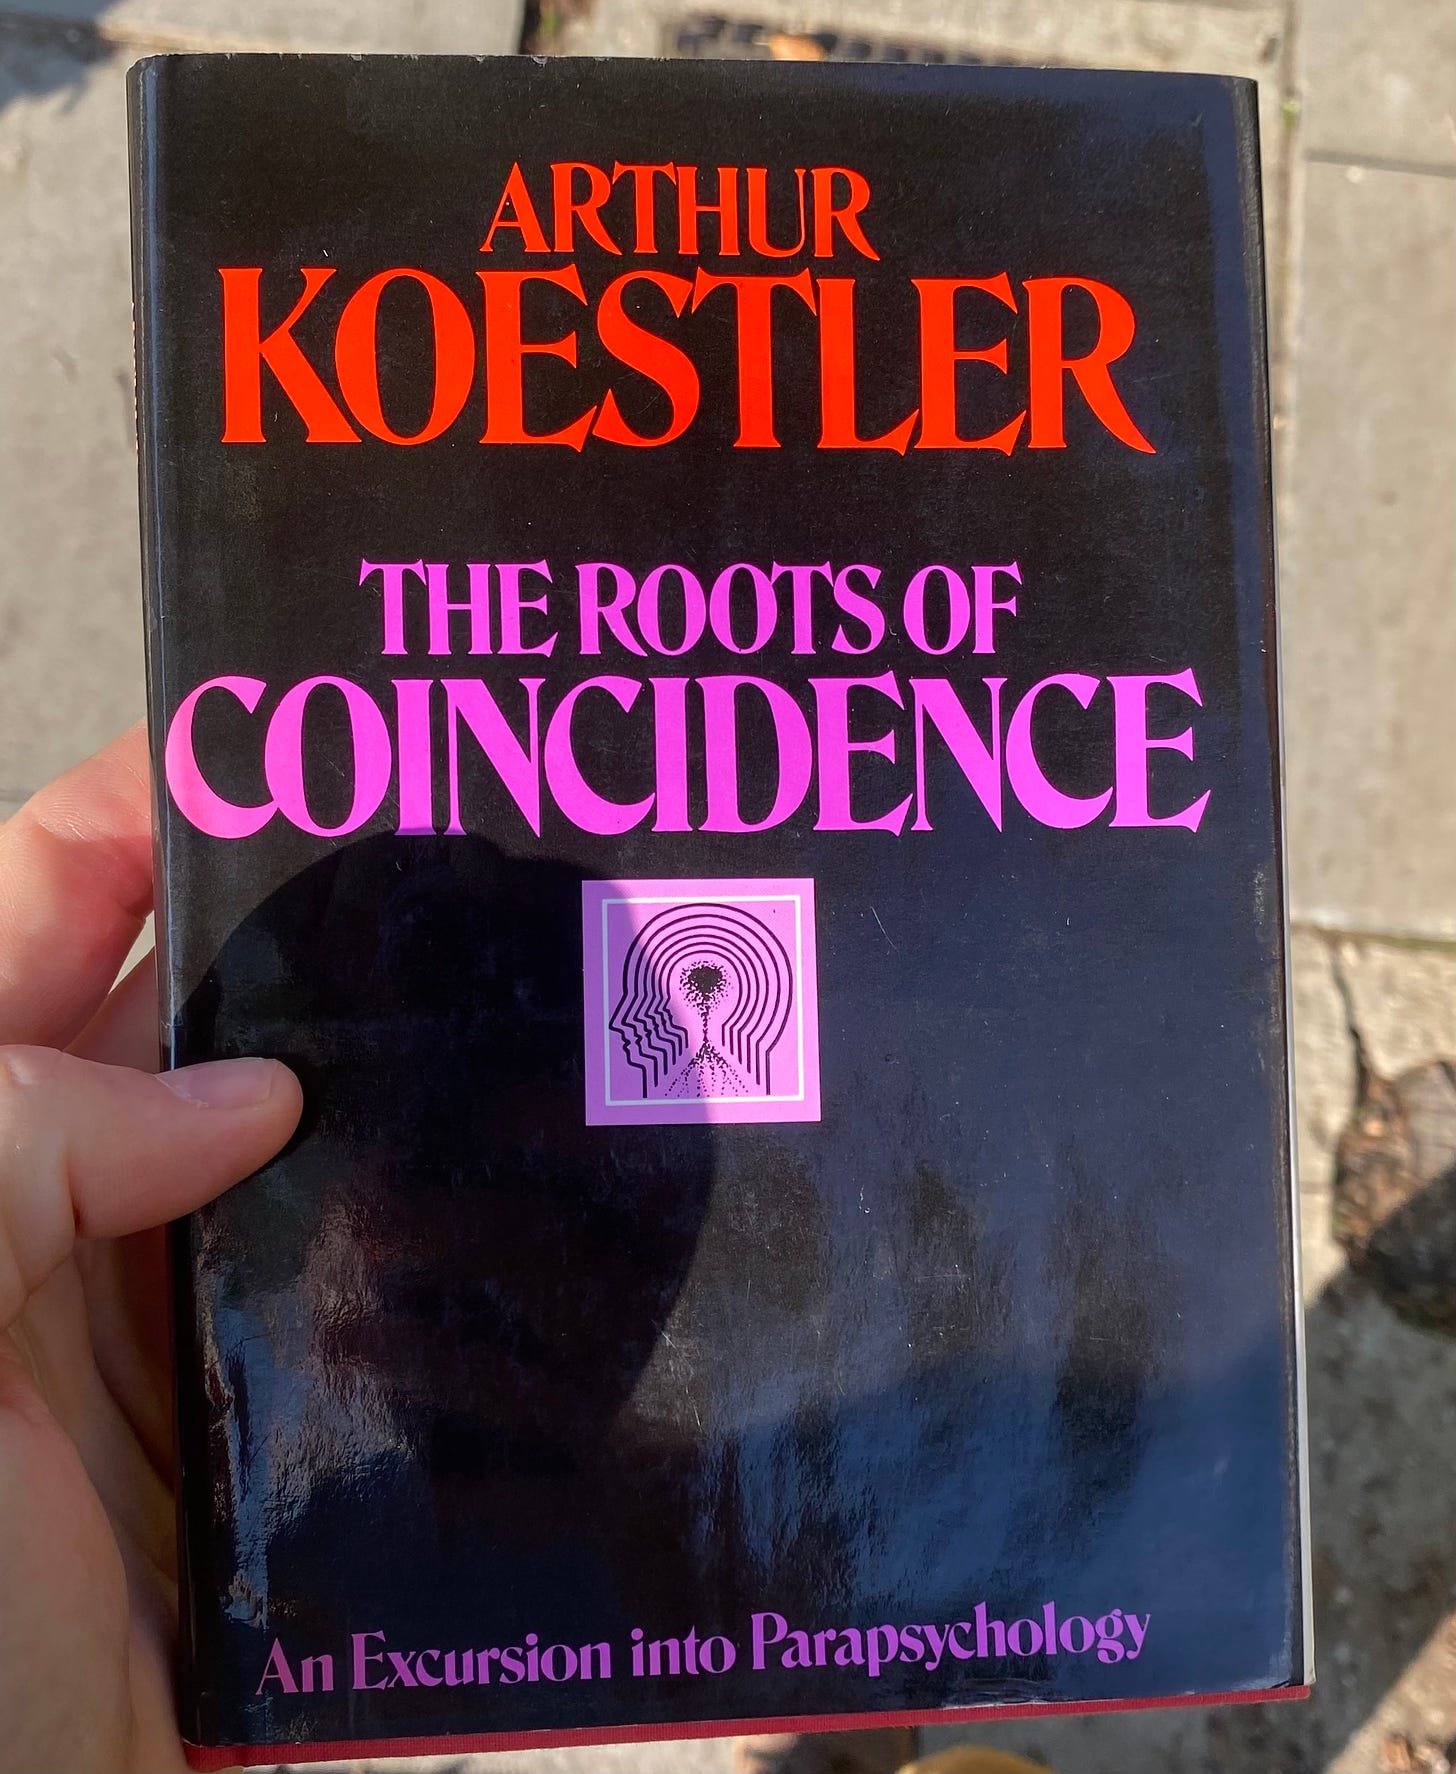 Photo, taken outside, shows a hand holding a book, a hardback copy of 'The Roots of Coincidence' by Arthur Koestler. The dust cover is black, with red and purple lettering. Below the book is a pavement of concrete slabs. The photo was taken in sunny weather, and the light is reflecting off the book's cover.